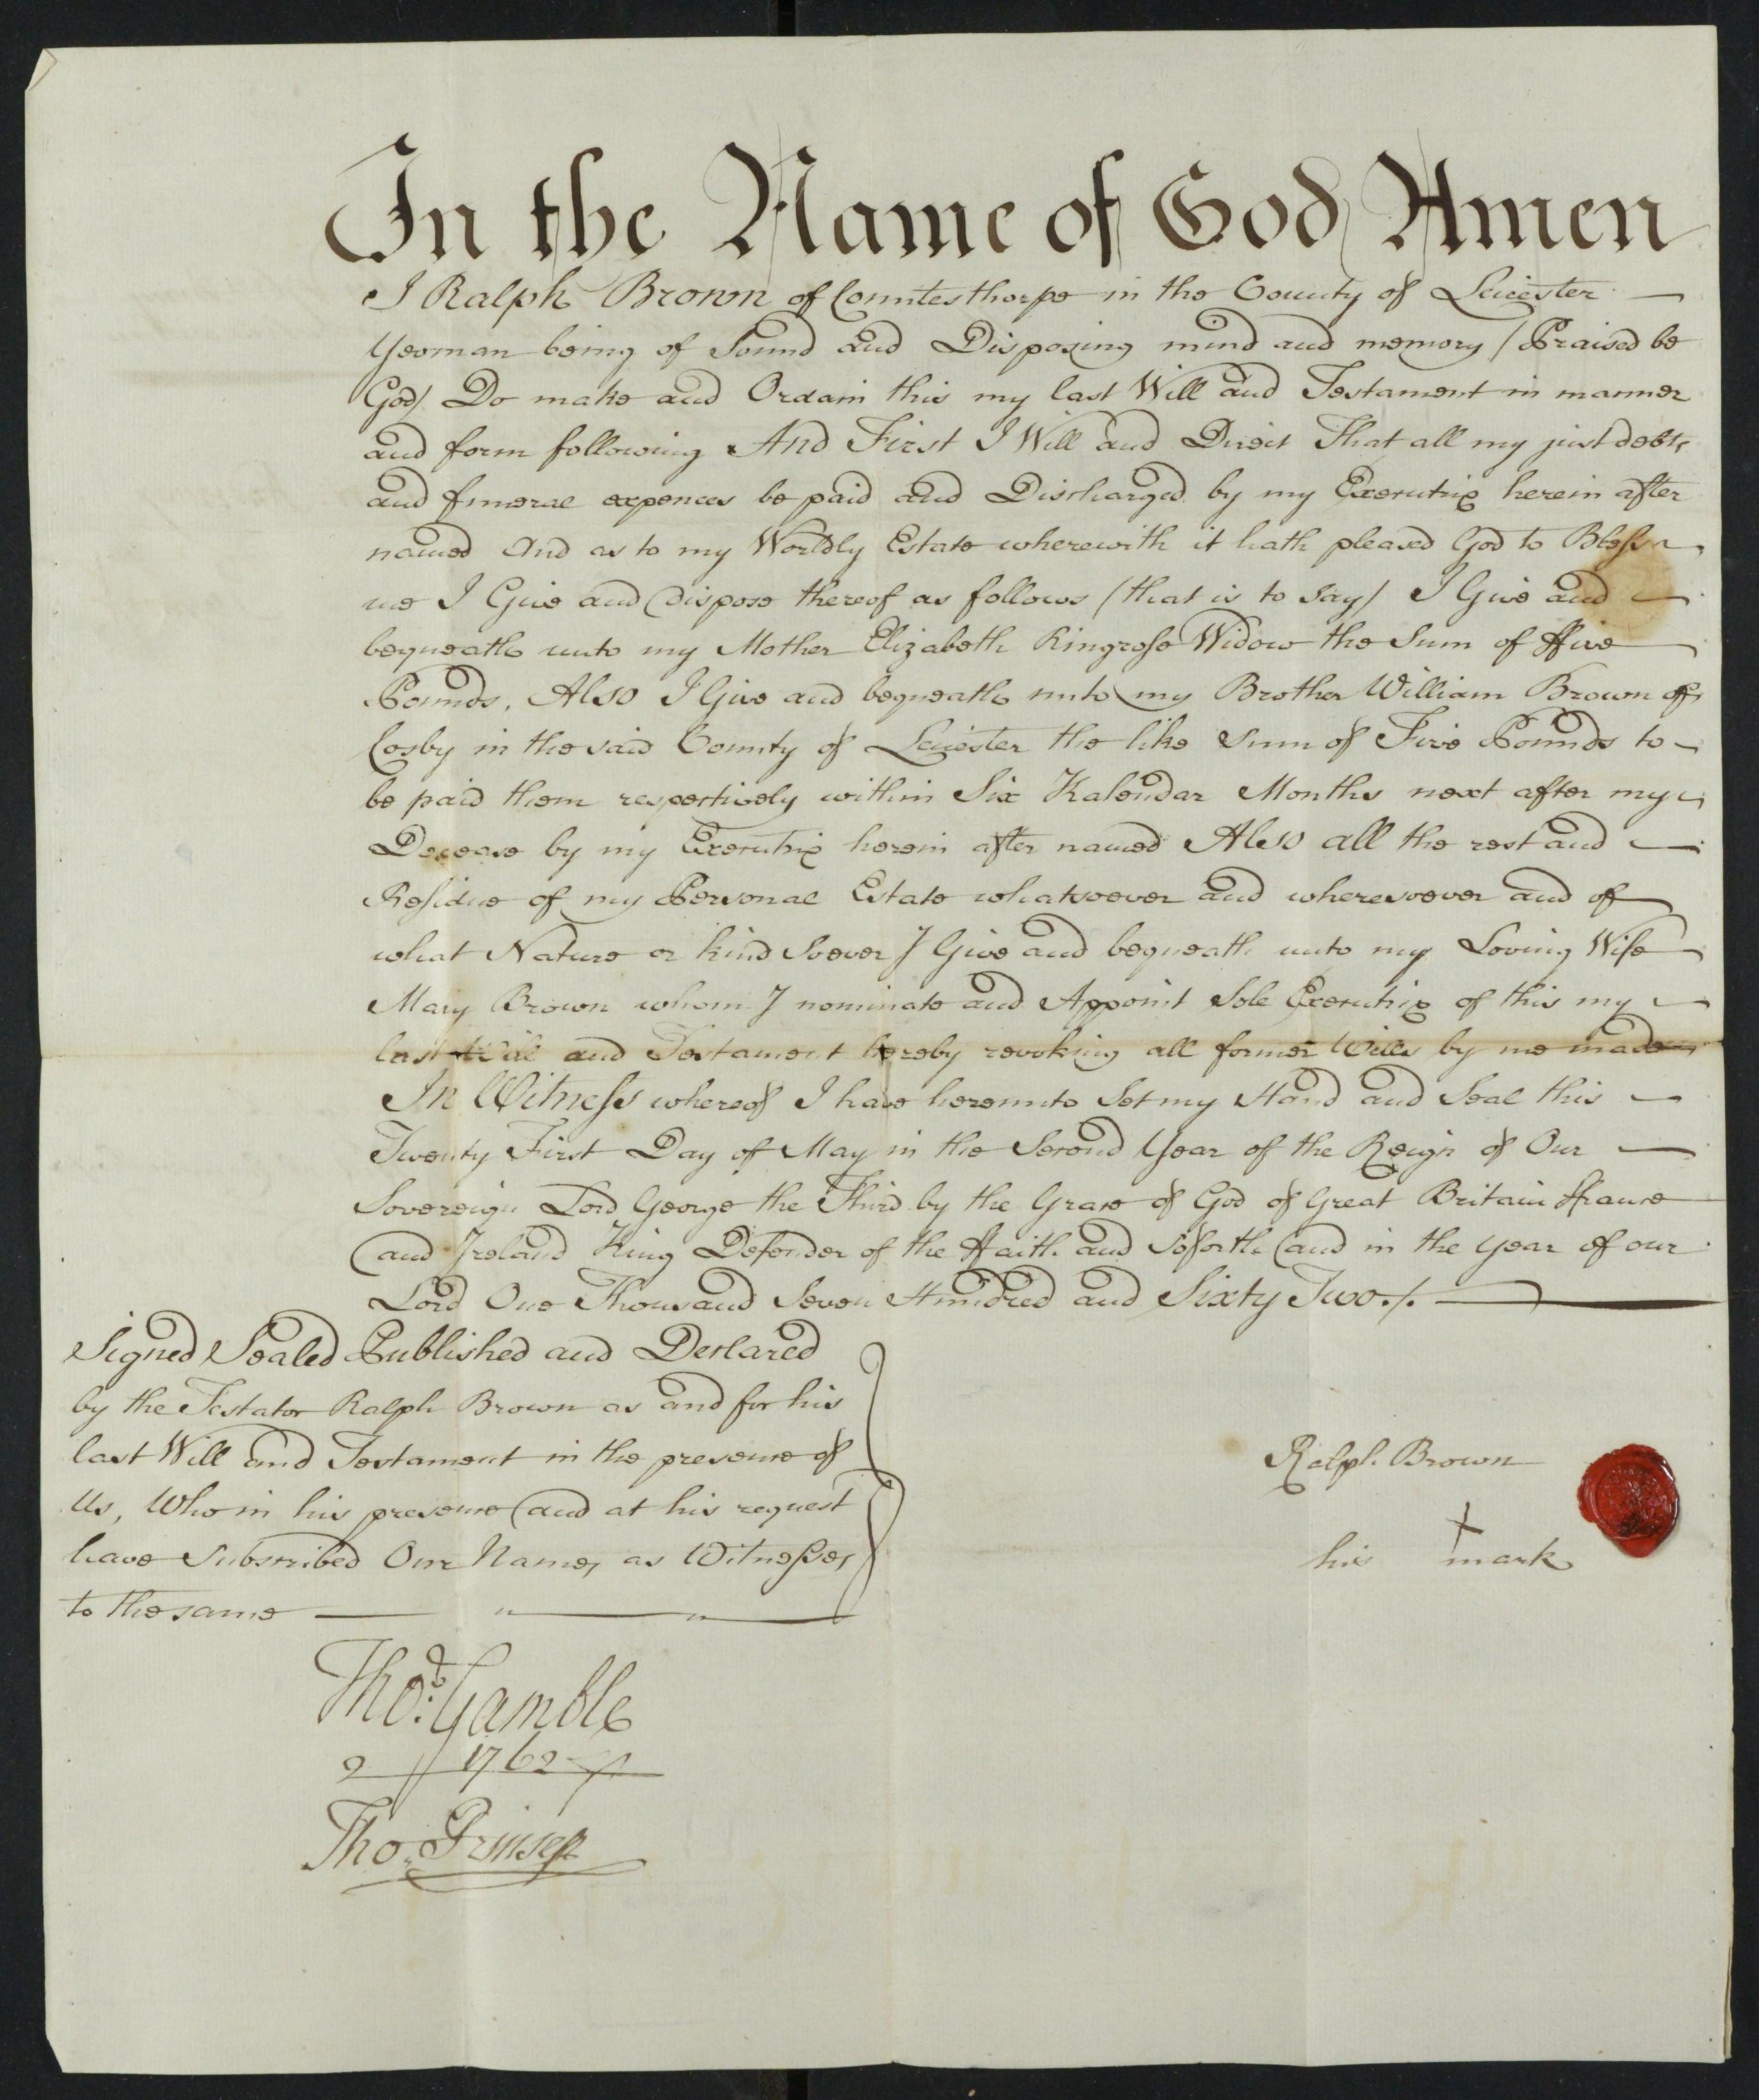 Ralph Brown's will of 1762